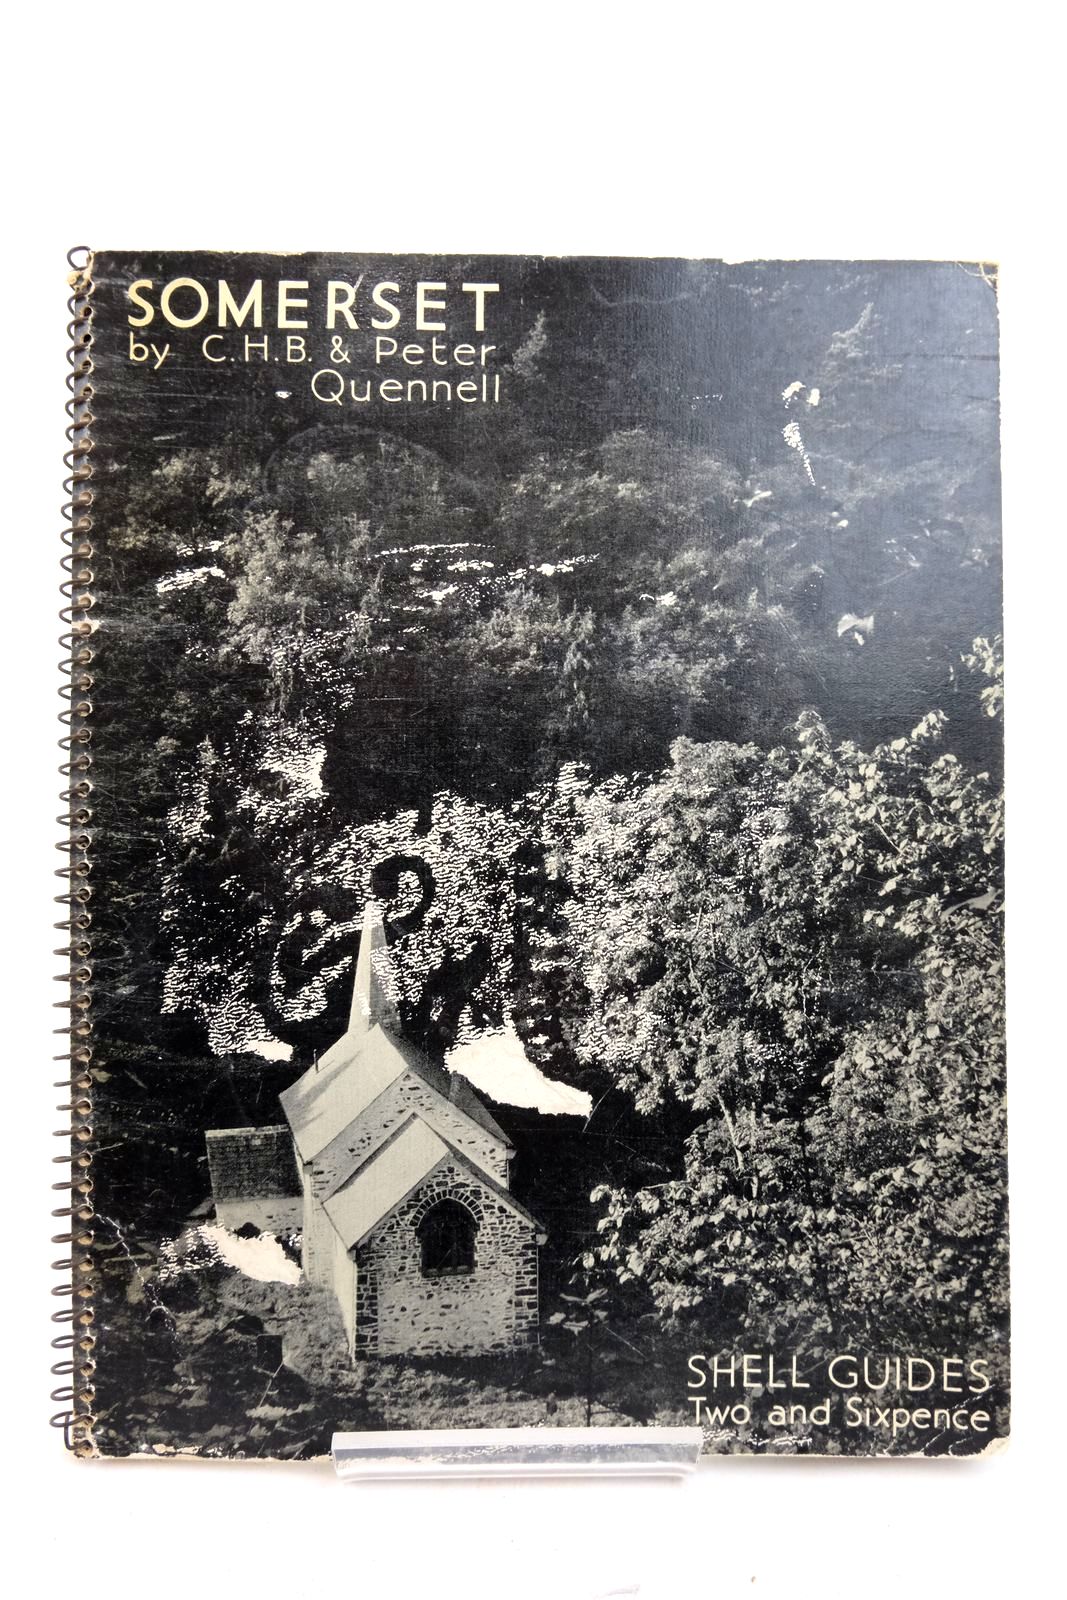 Photo of SOMERSET SHELL GUIDE written by Quennell, C.H.B. Quennell, Peter published by The Architectural Press (STOCK CODE: 2137638)  for sale by Stella & Rose's Books